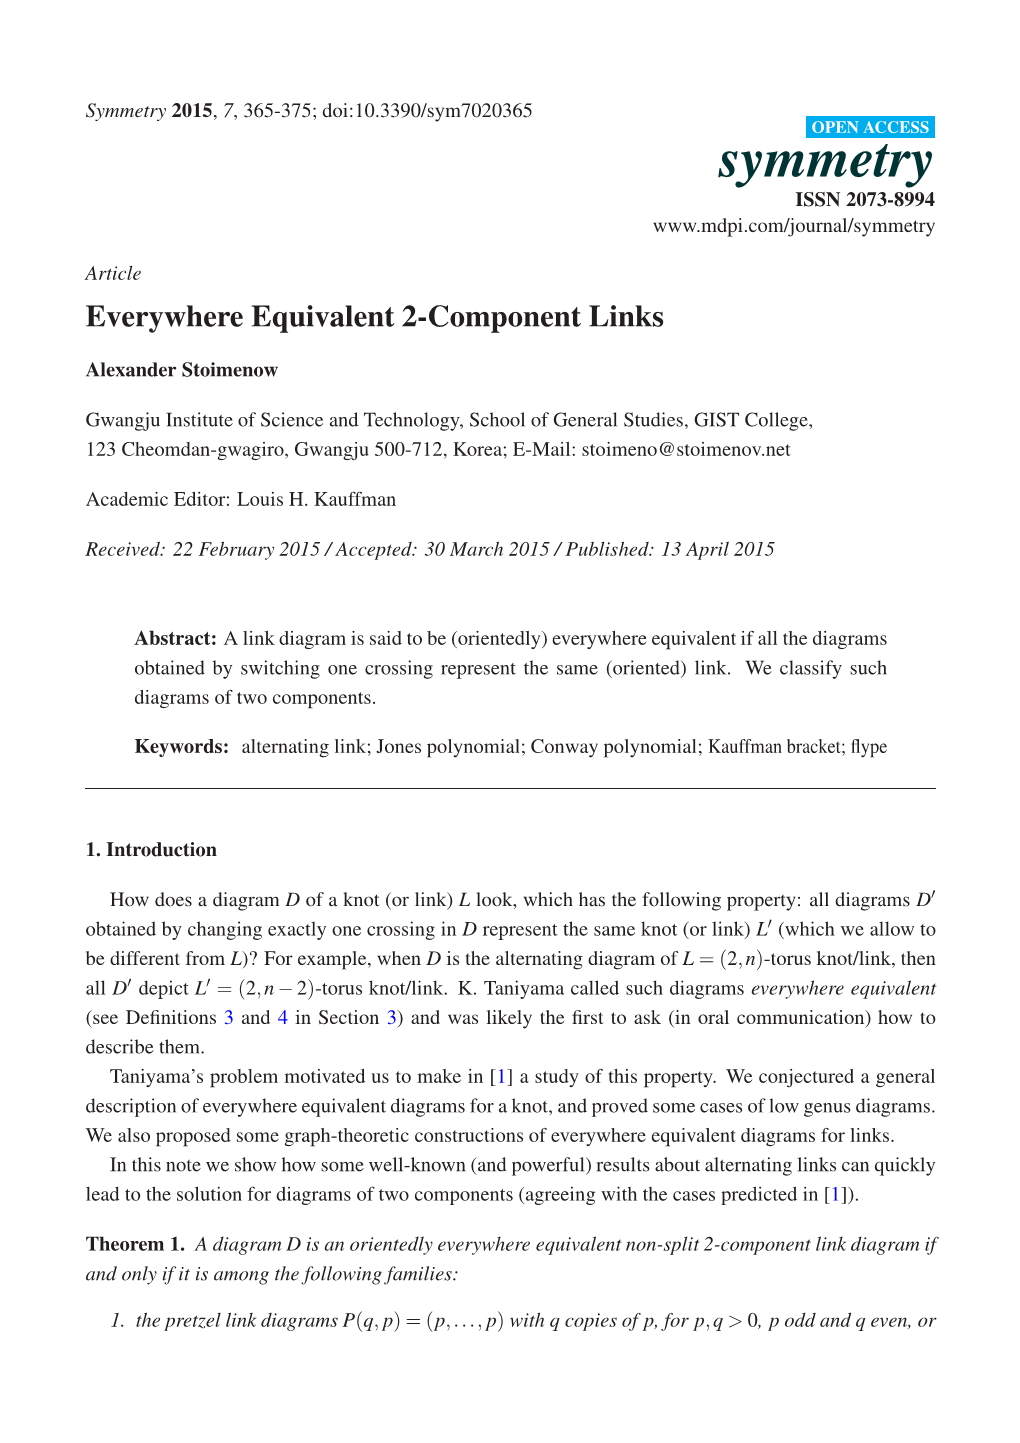 Everywhere Equivalent 2-Component Links